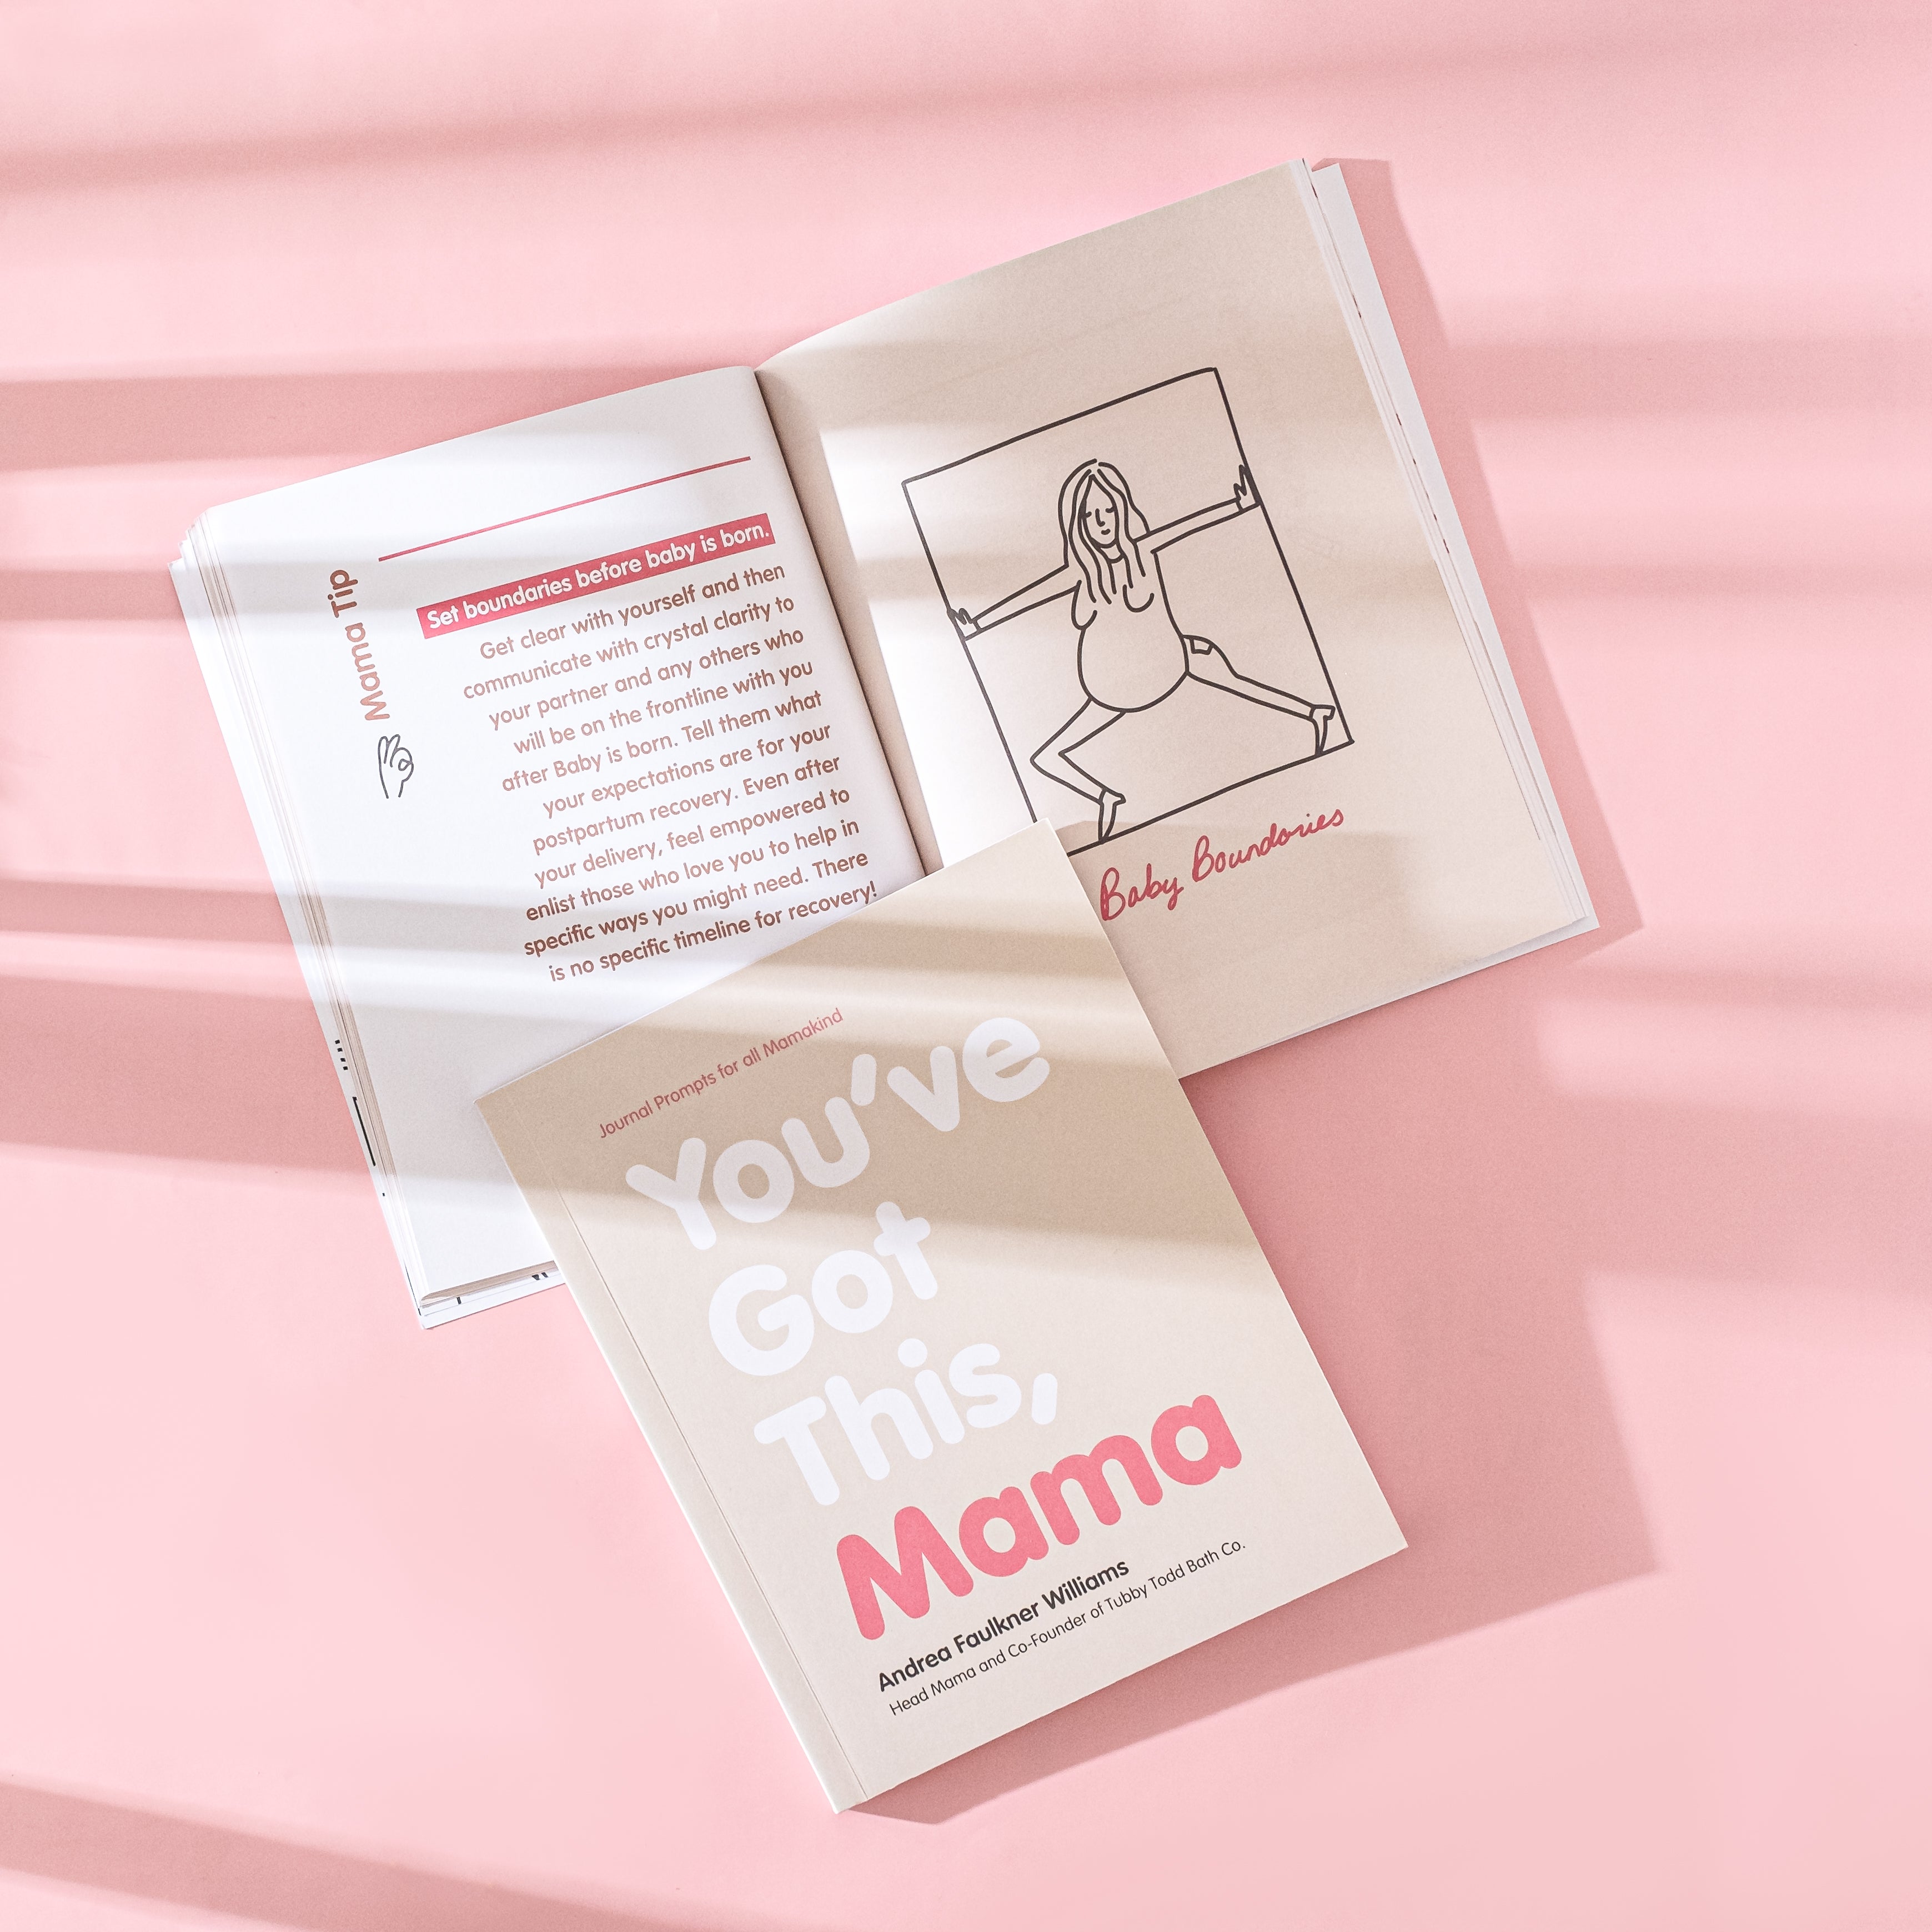 One open Mama Book and the other are placed on top of it.